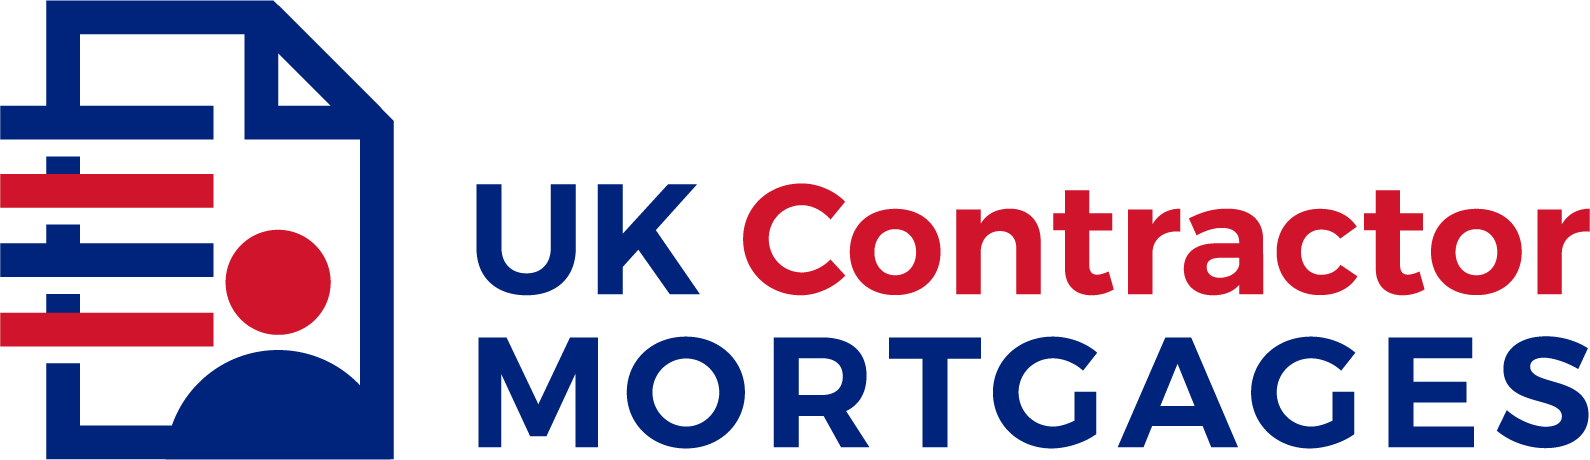 UK Contractor Mortgages